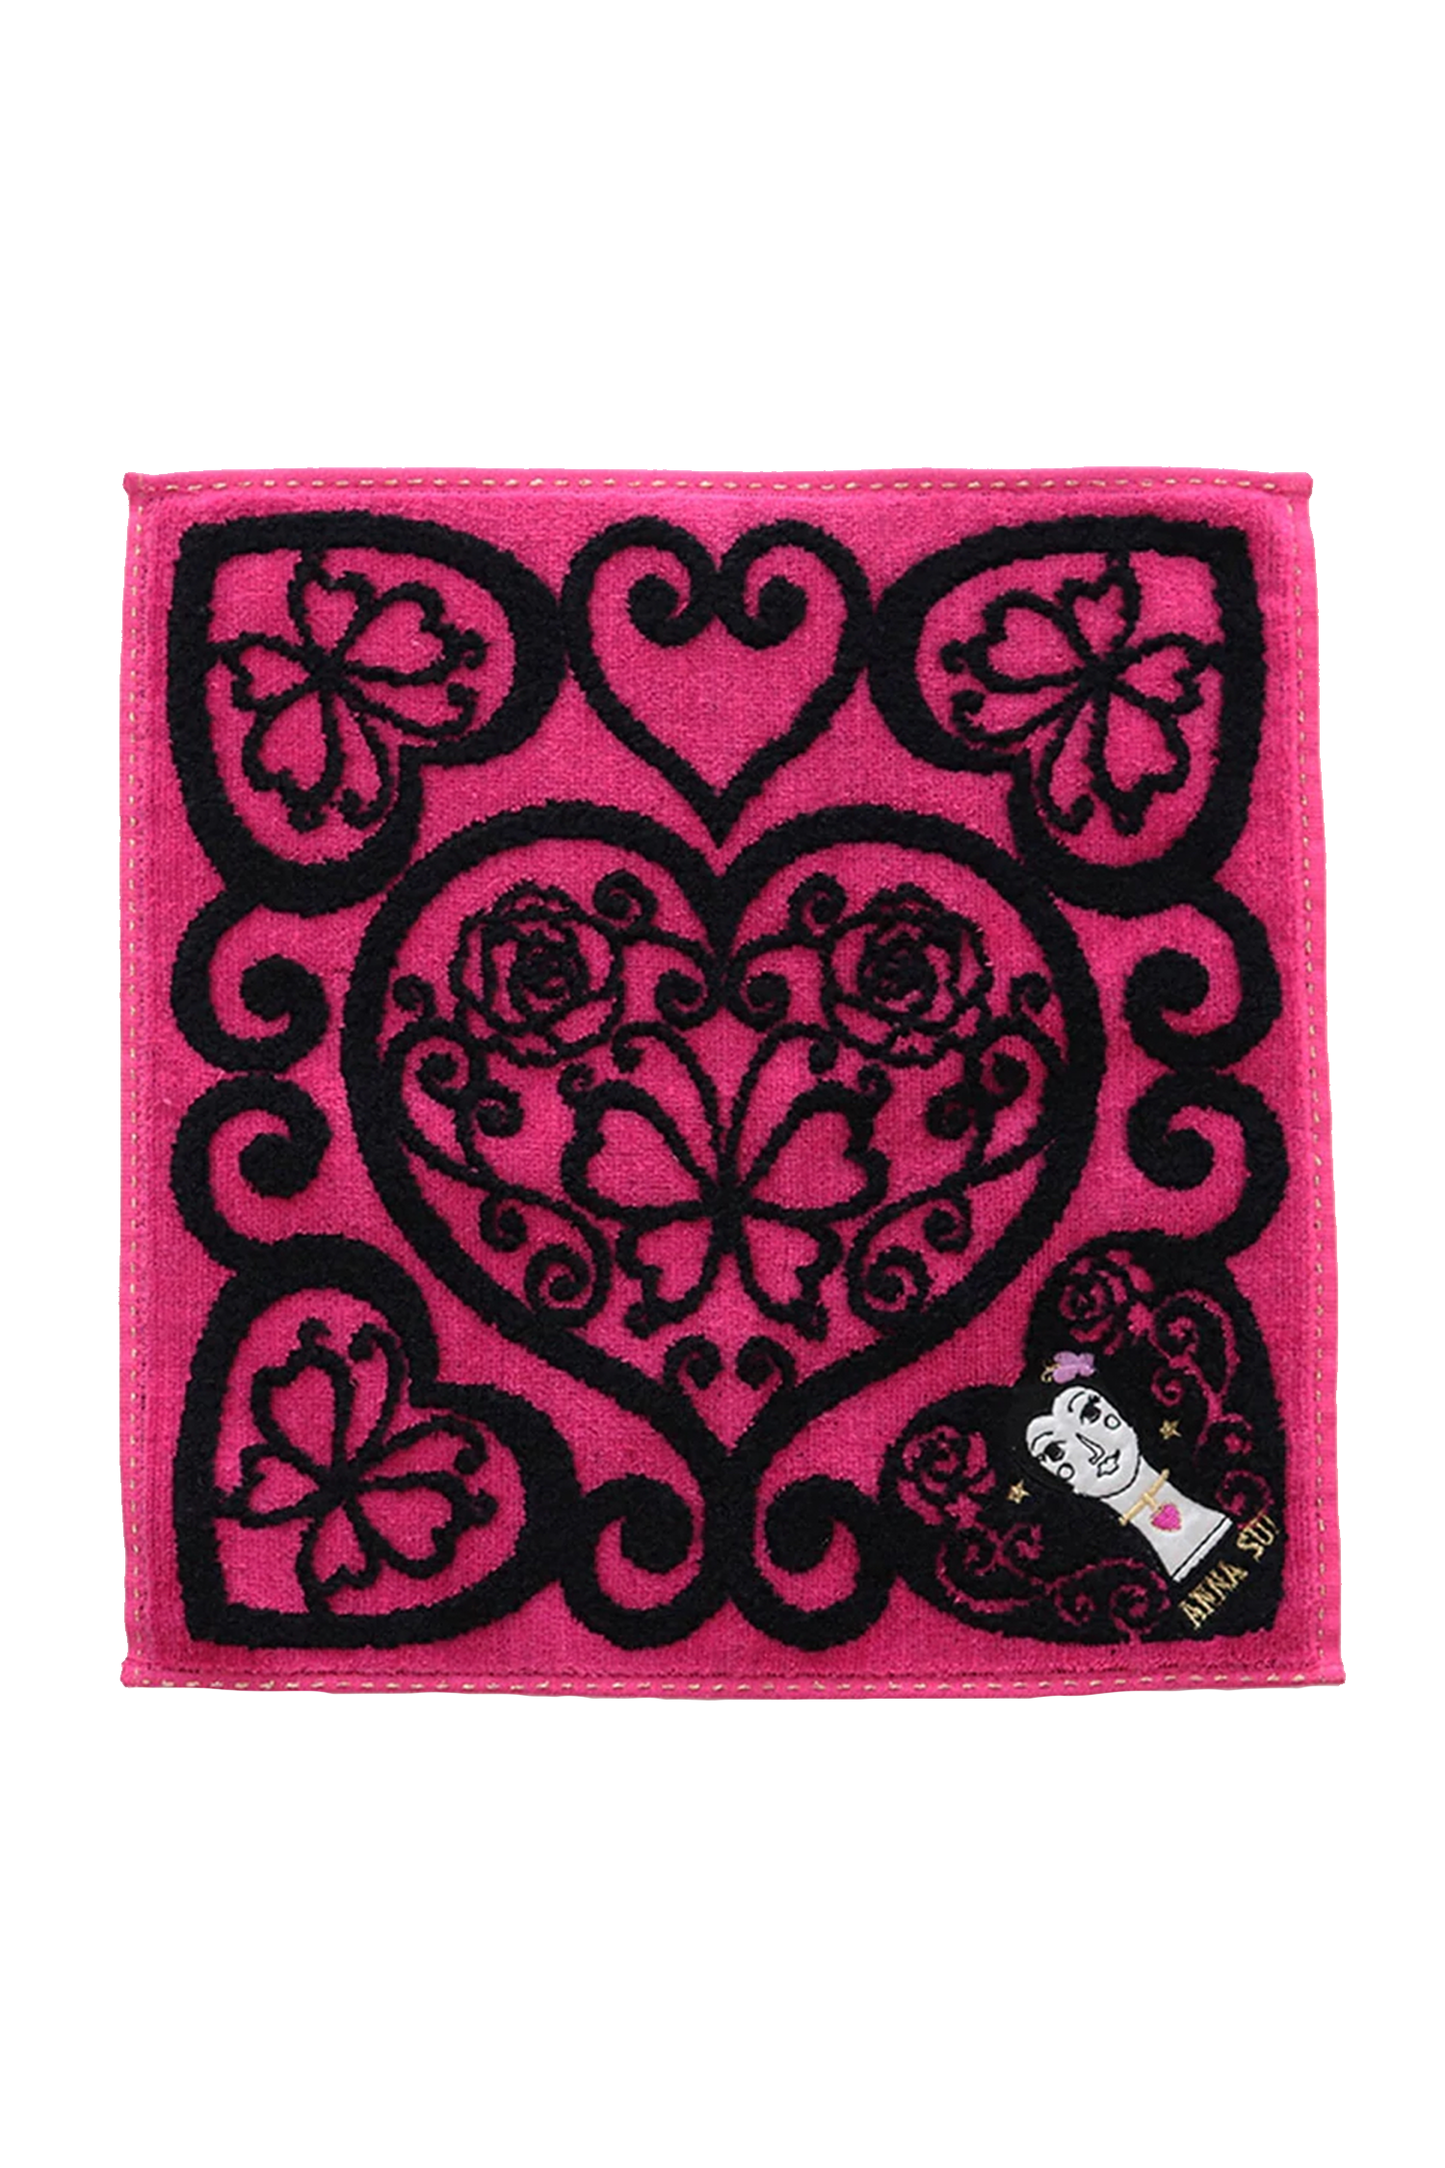 Dolly Head Washcloth, red, 4-embroidery black hearts in corners 1-center and Anna Sui’s doll in one